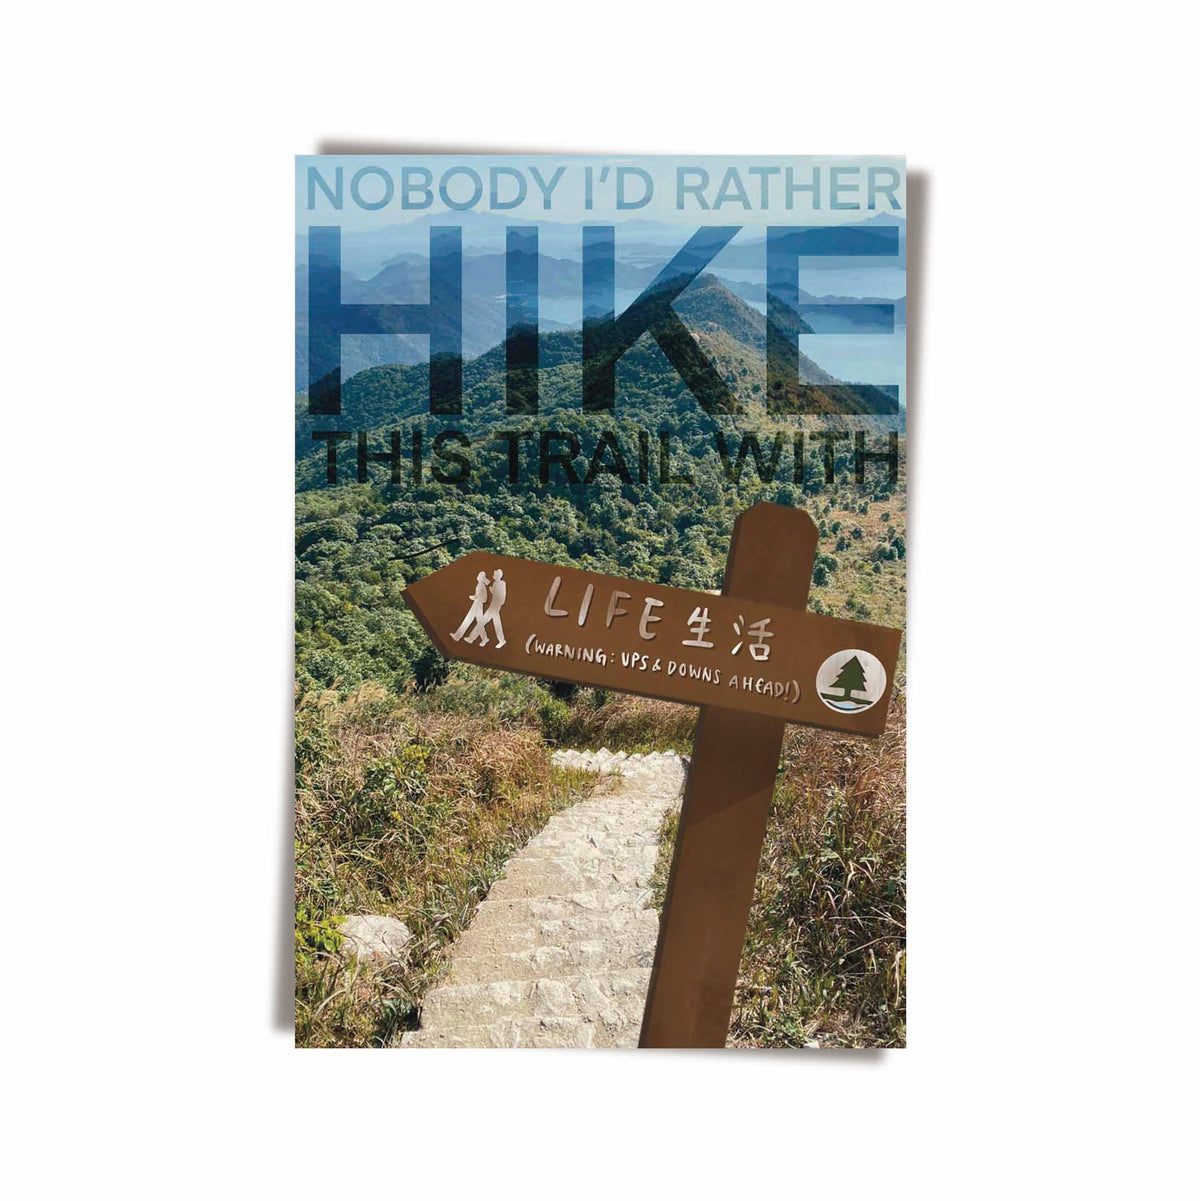 GREETING CARD: Nobody I'd Rather Hike This Trail With